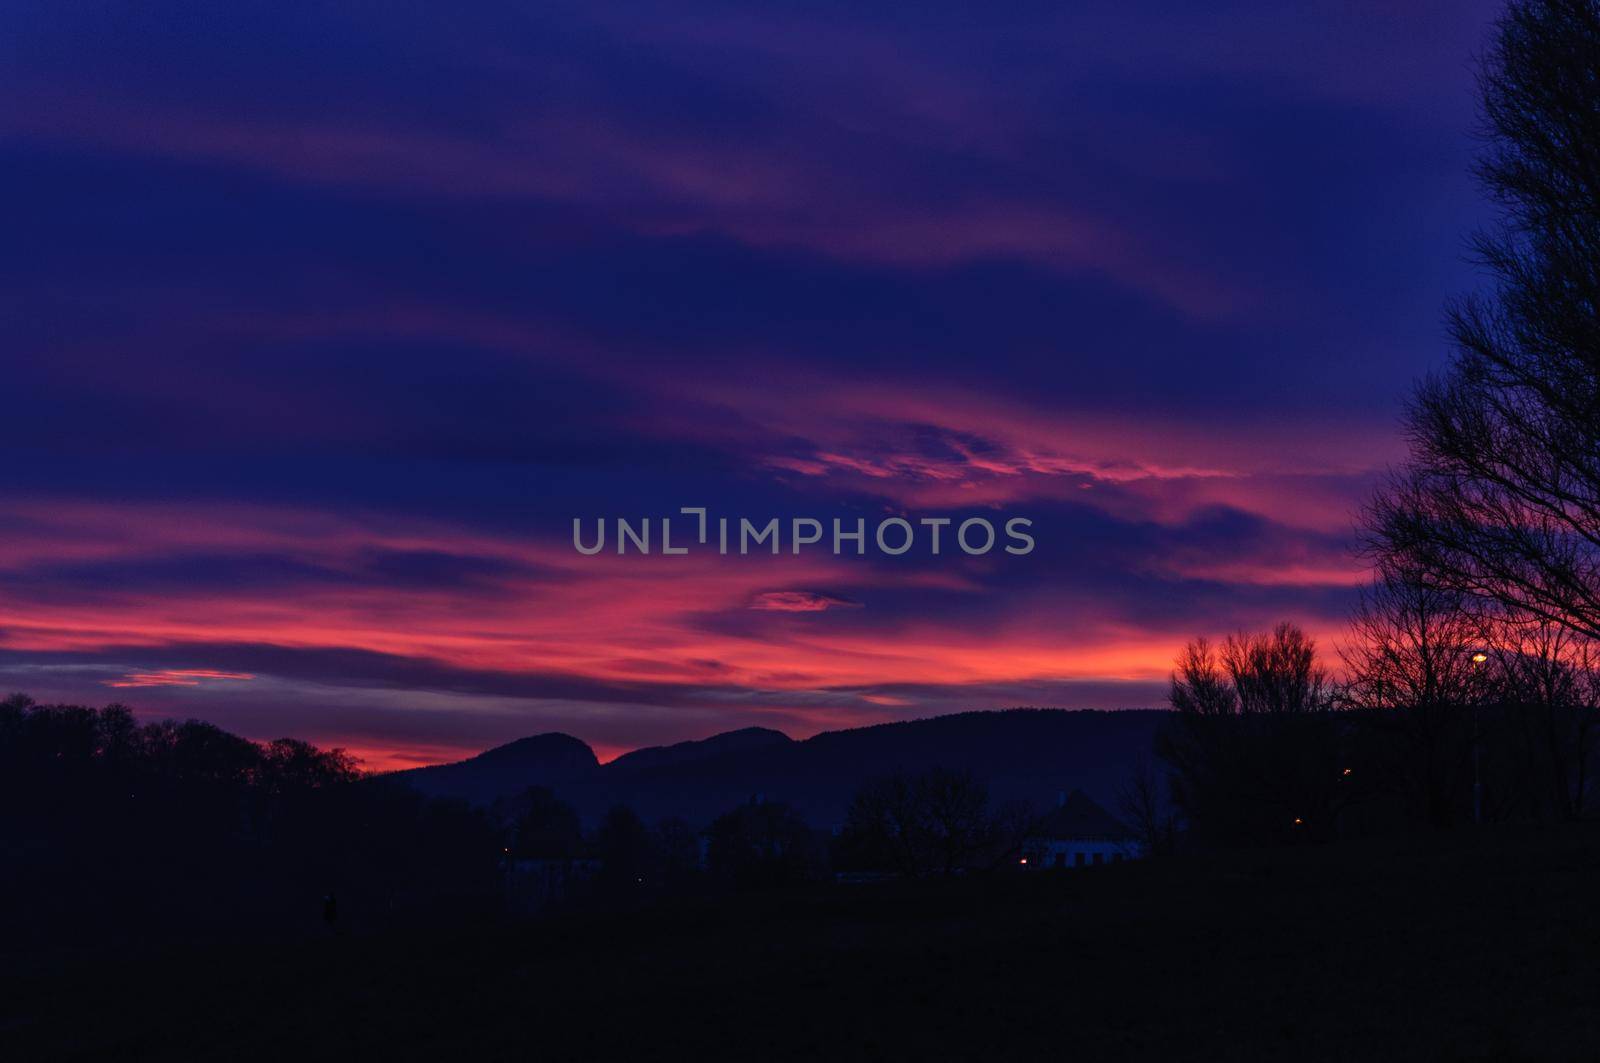 Sunset over Mountains. Night dark blue and pink sky by shanserika